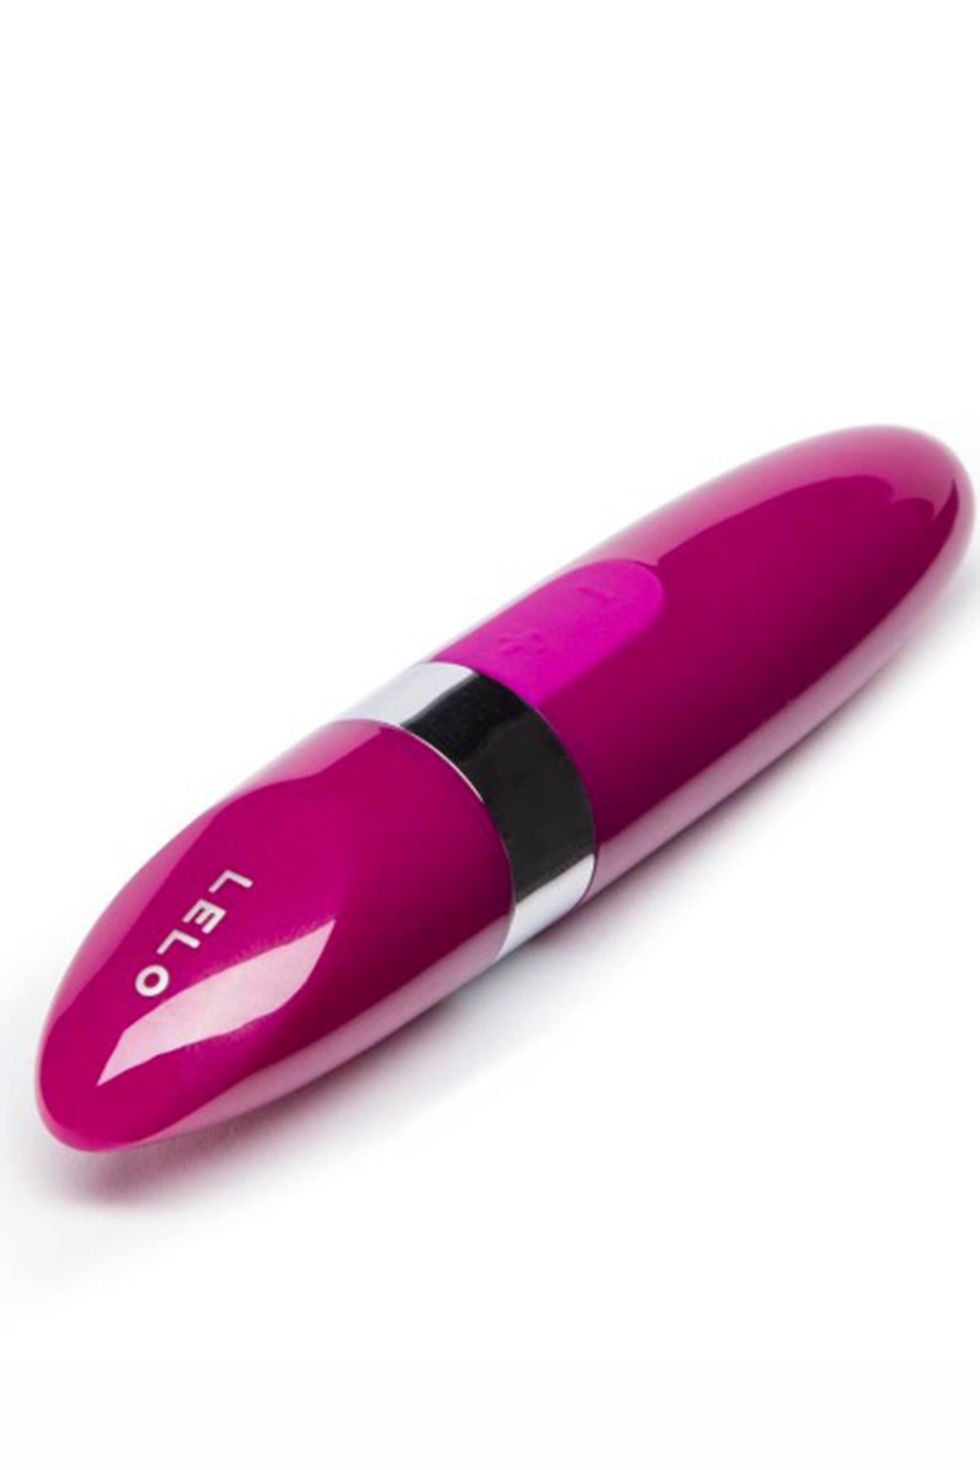 Star sign sex toy recommendations